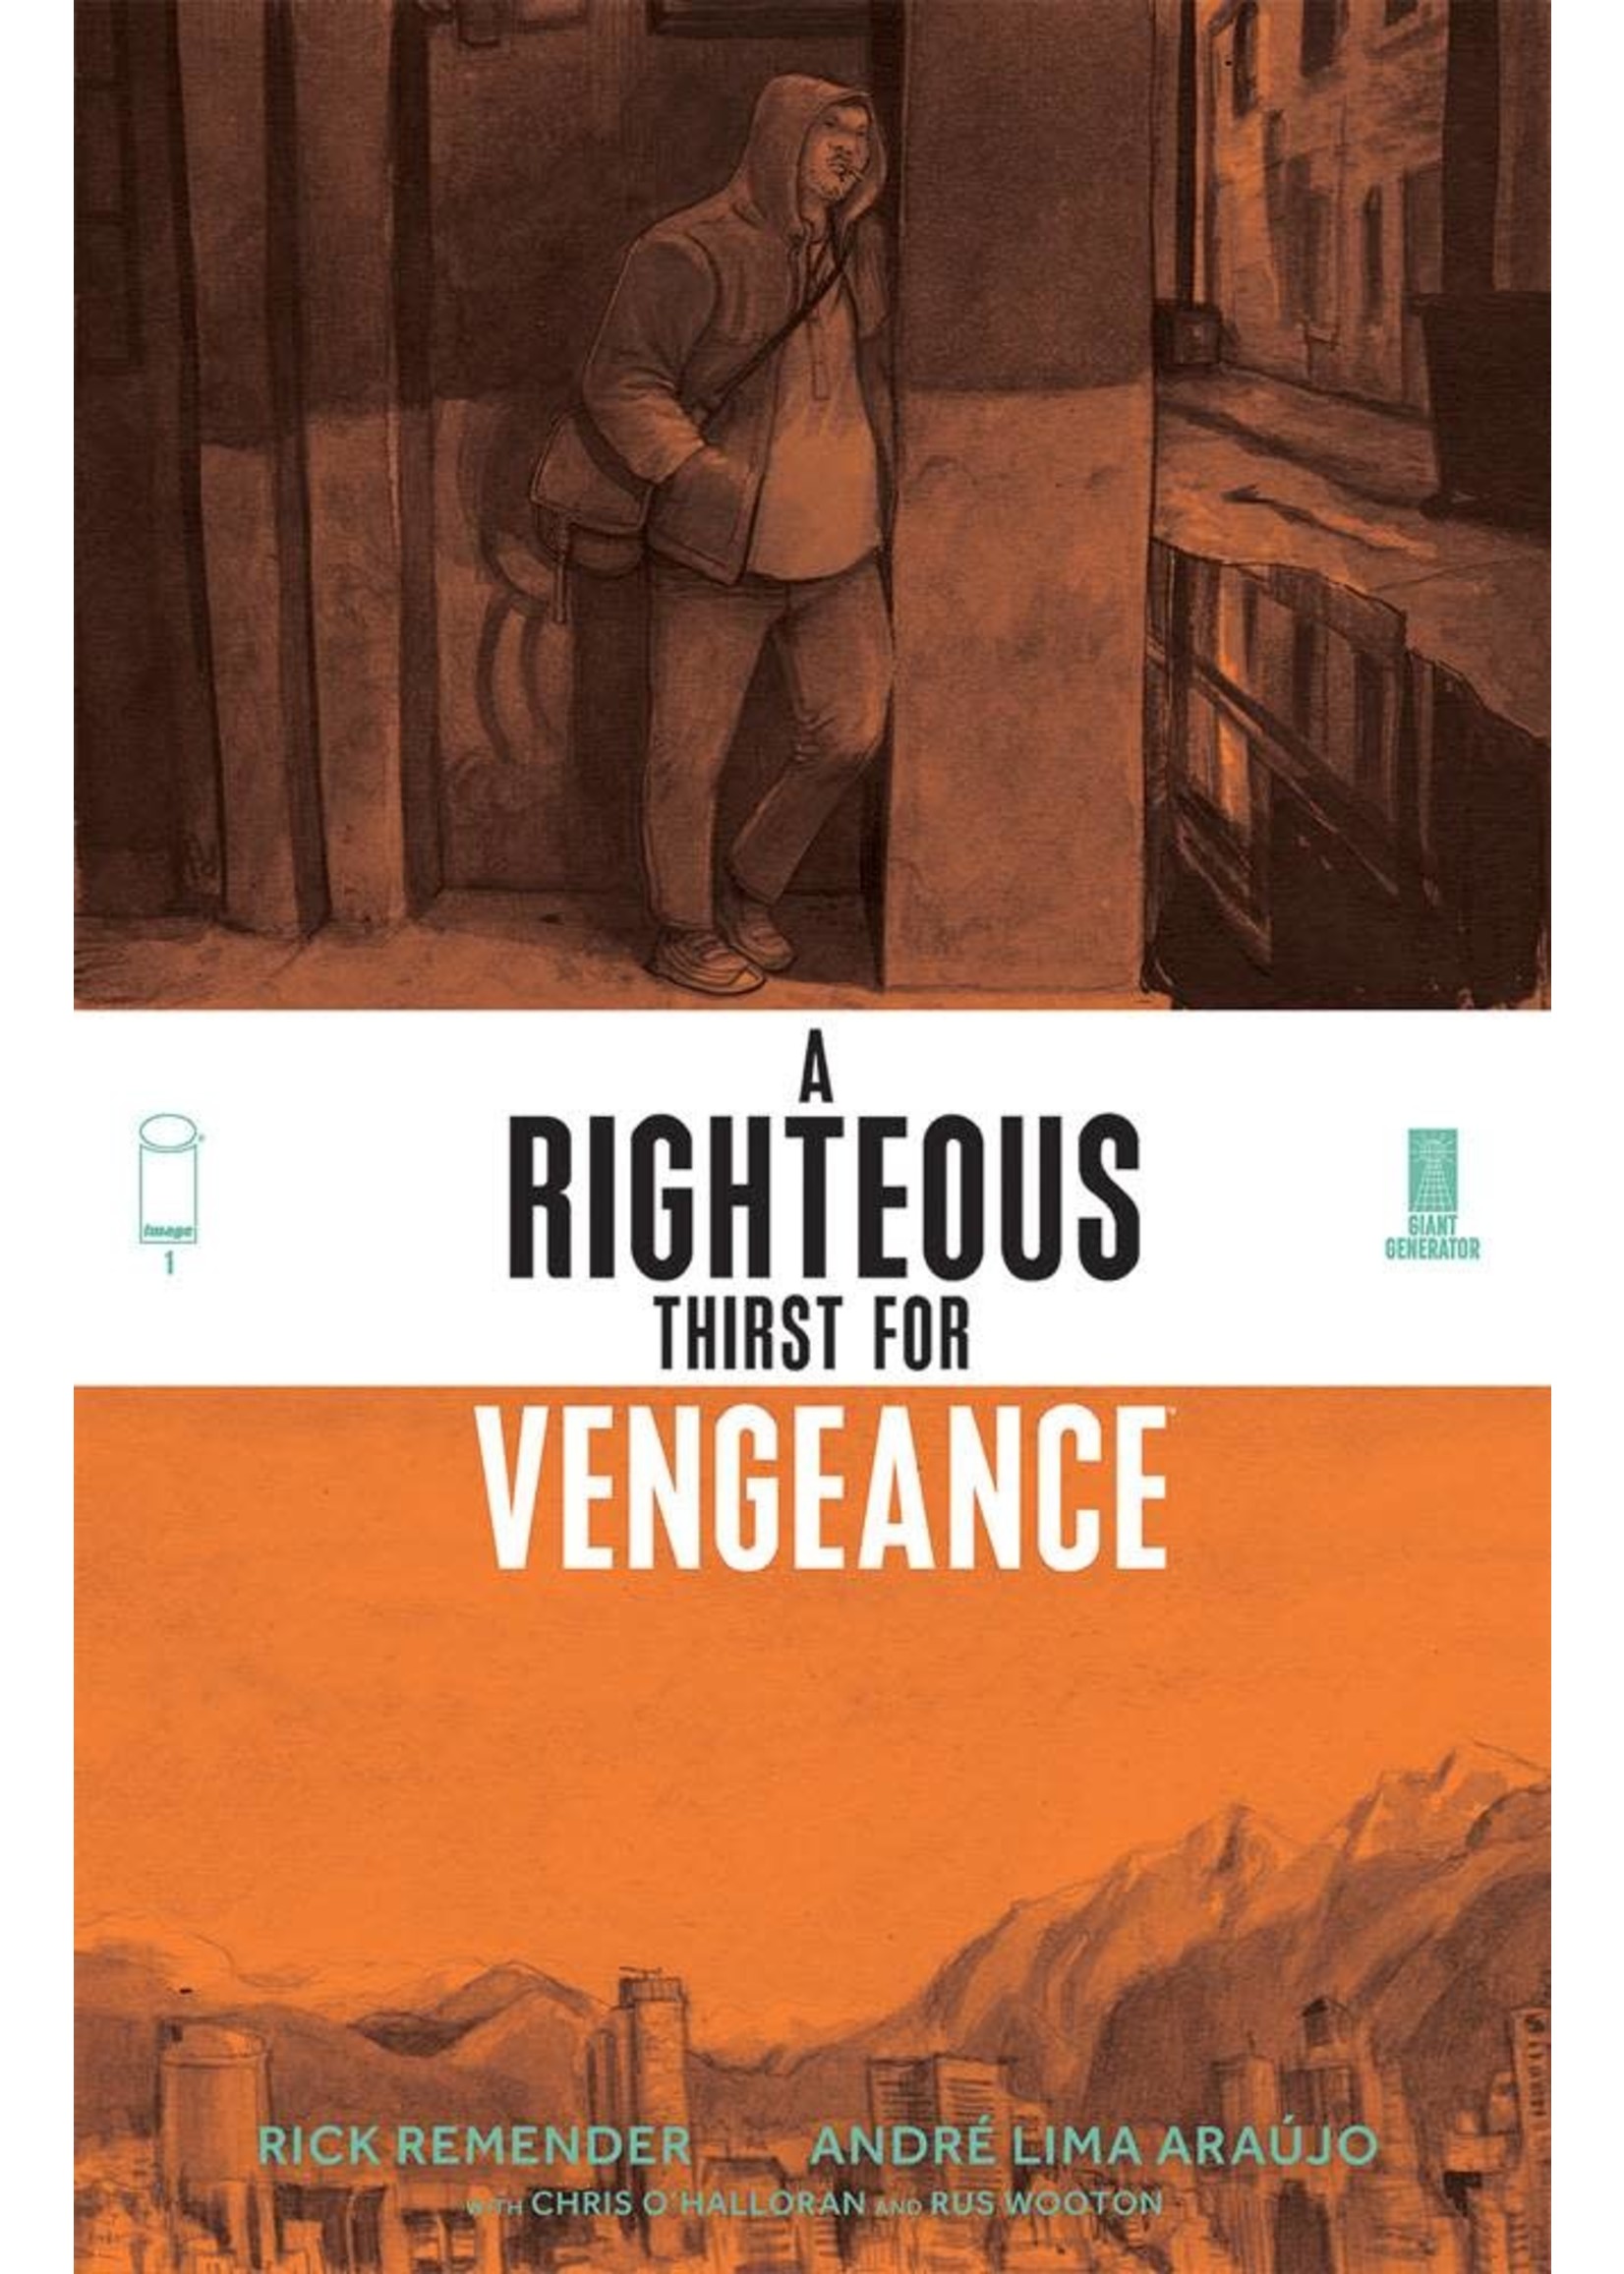 IMAGE COMICS RIGHTEOUS THIRST FOR VENGEANCE #1 CVR C DALRYMPLE